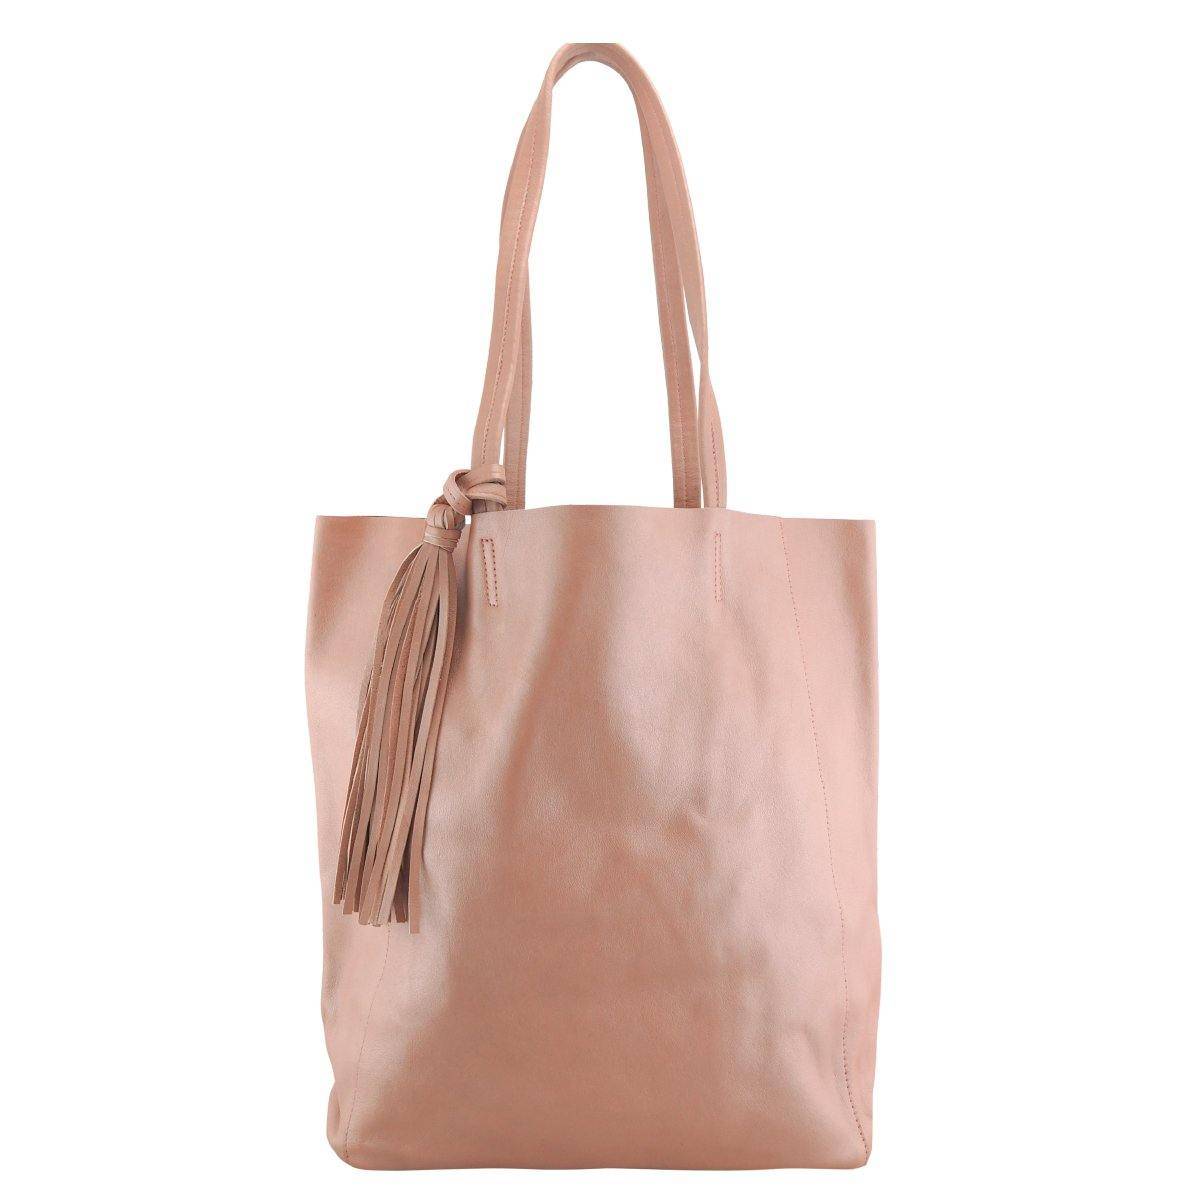 Cadelle Leather Metallic Leather Tote Bag